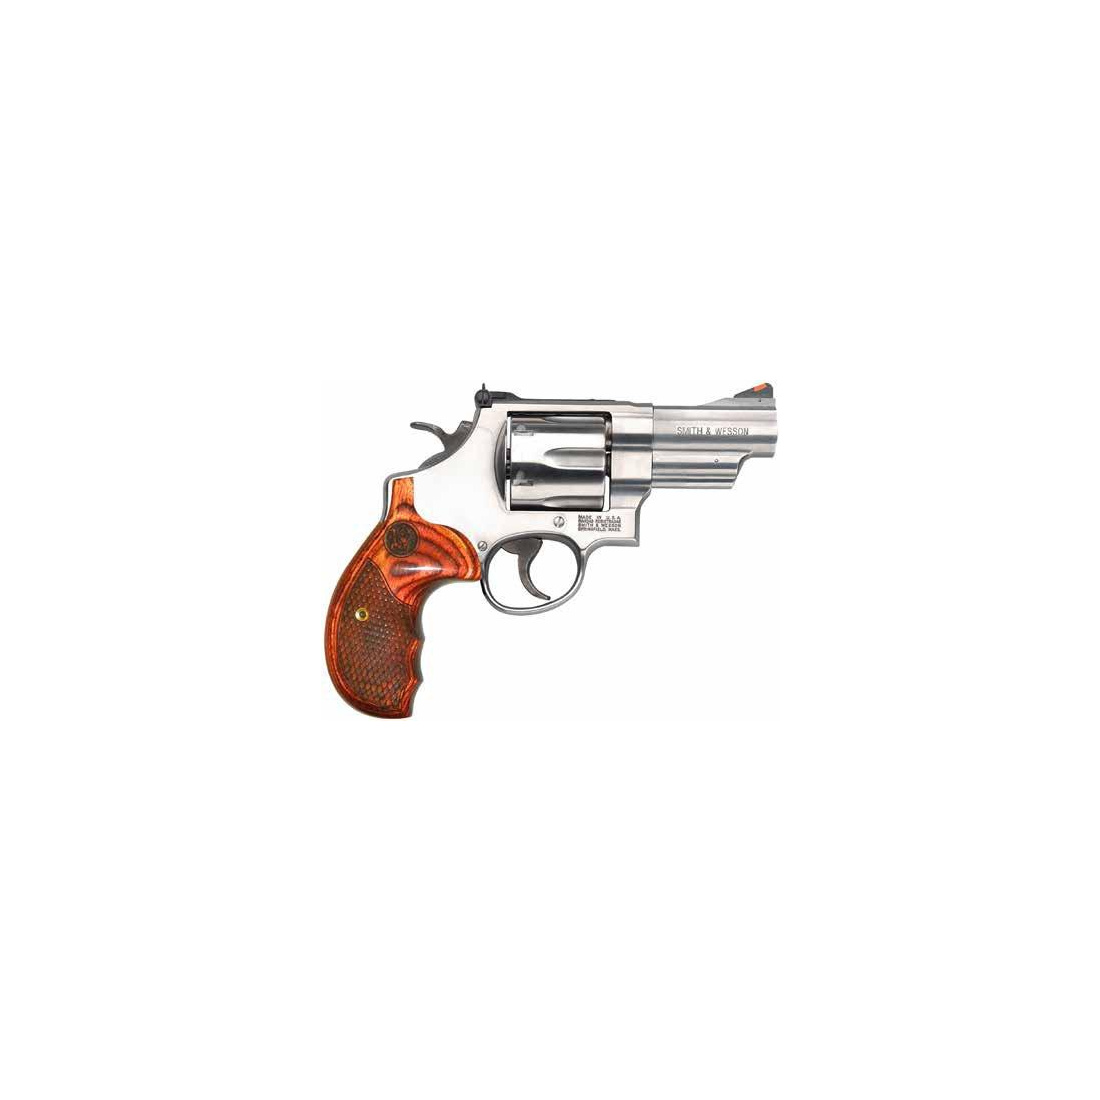 SMITH & WESSON Revolver Mod. 629 -3' DeLuxe .44RemMag  RosenHolz-Griff